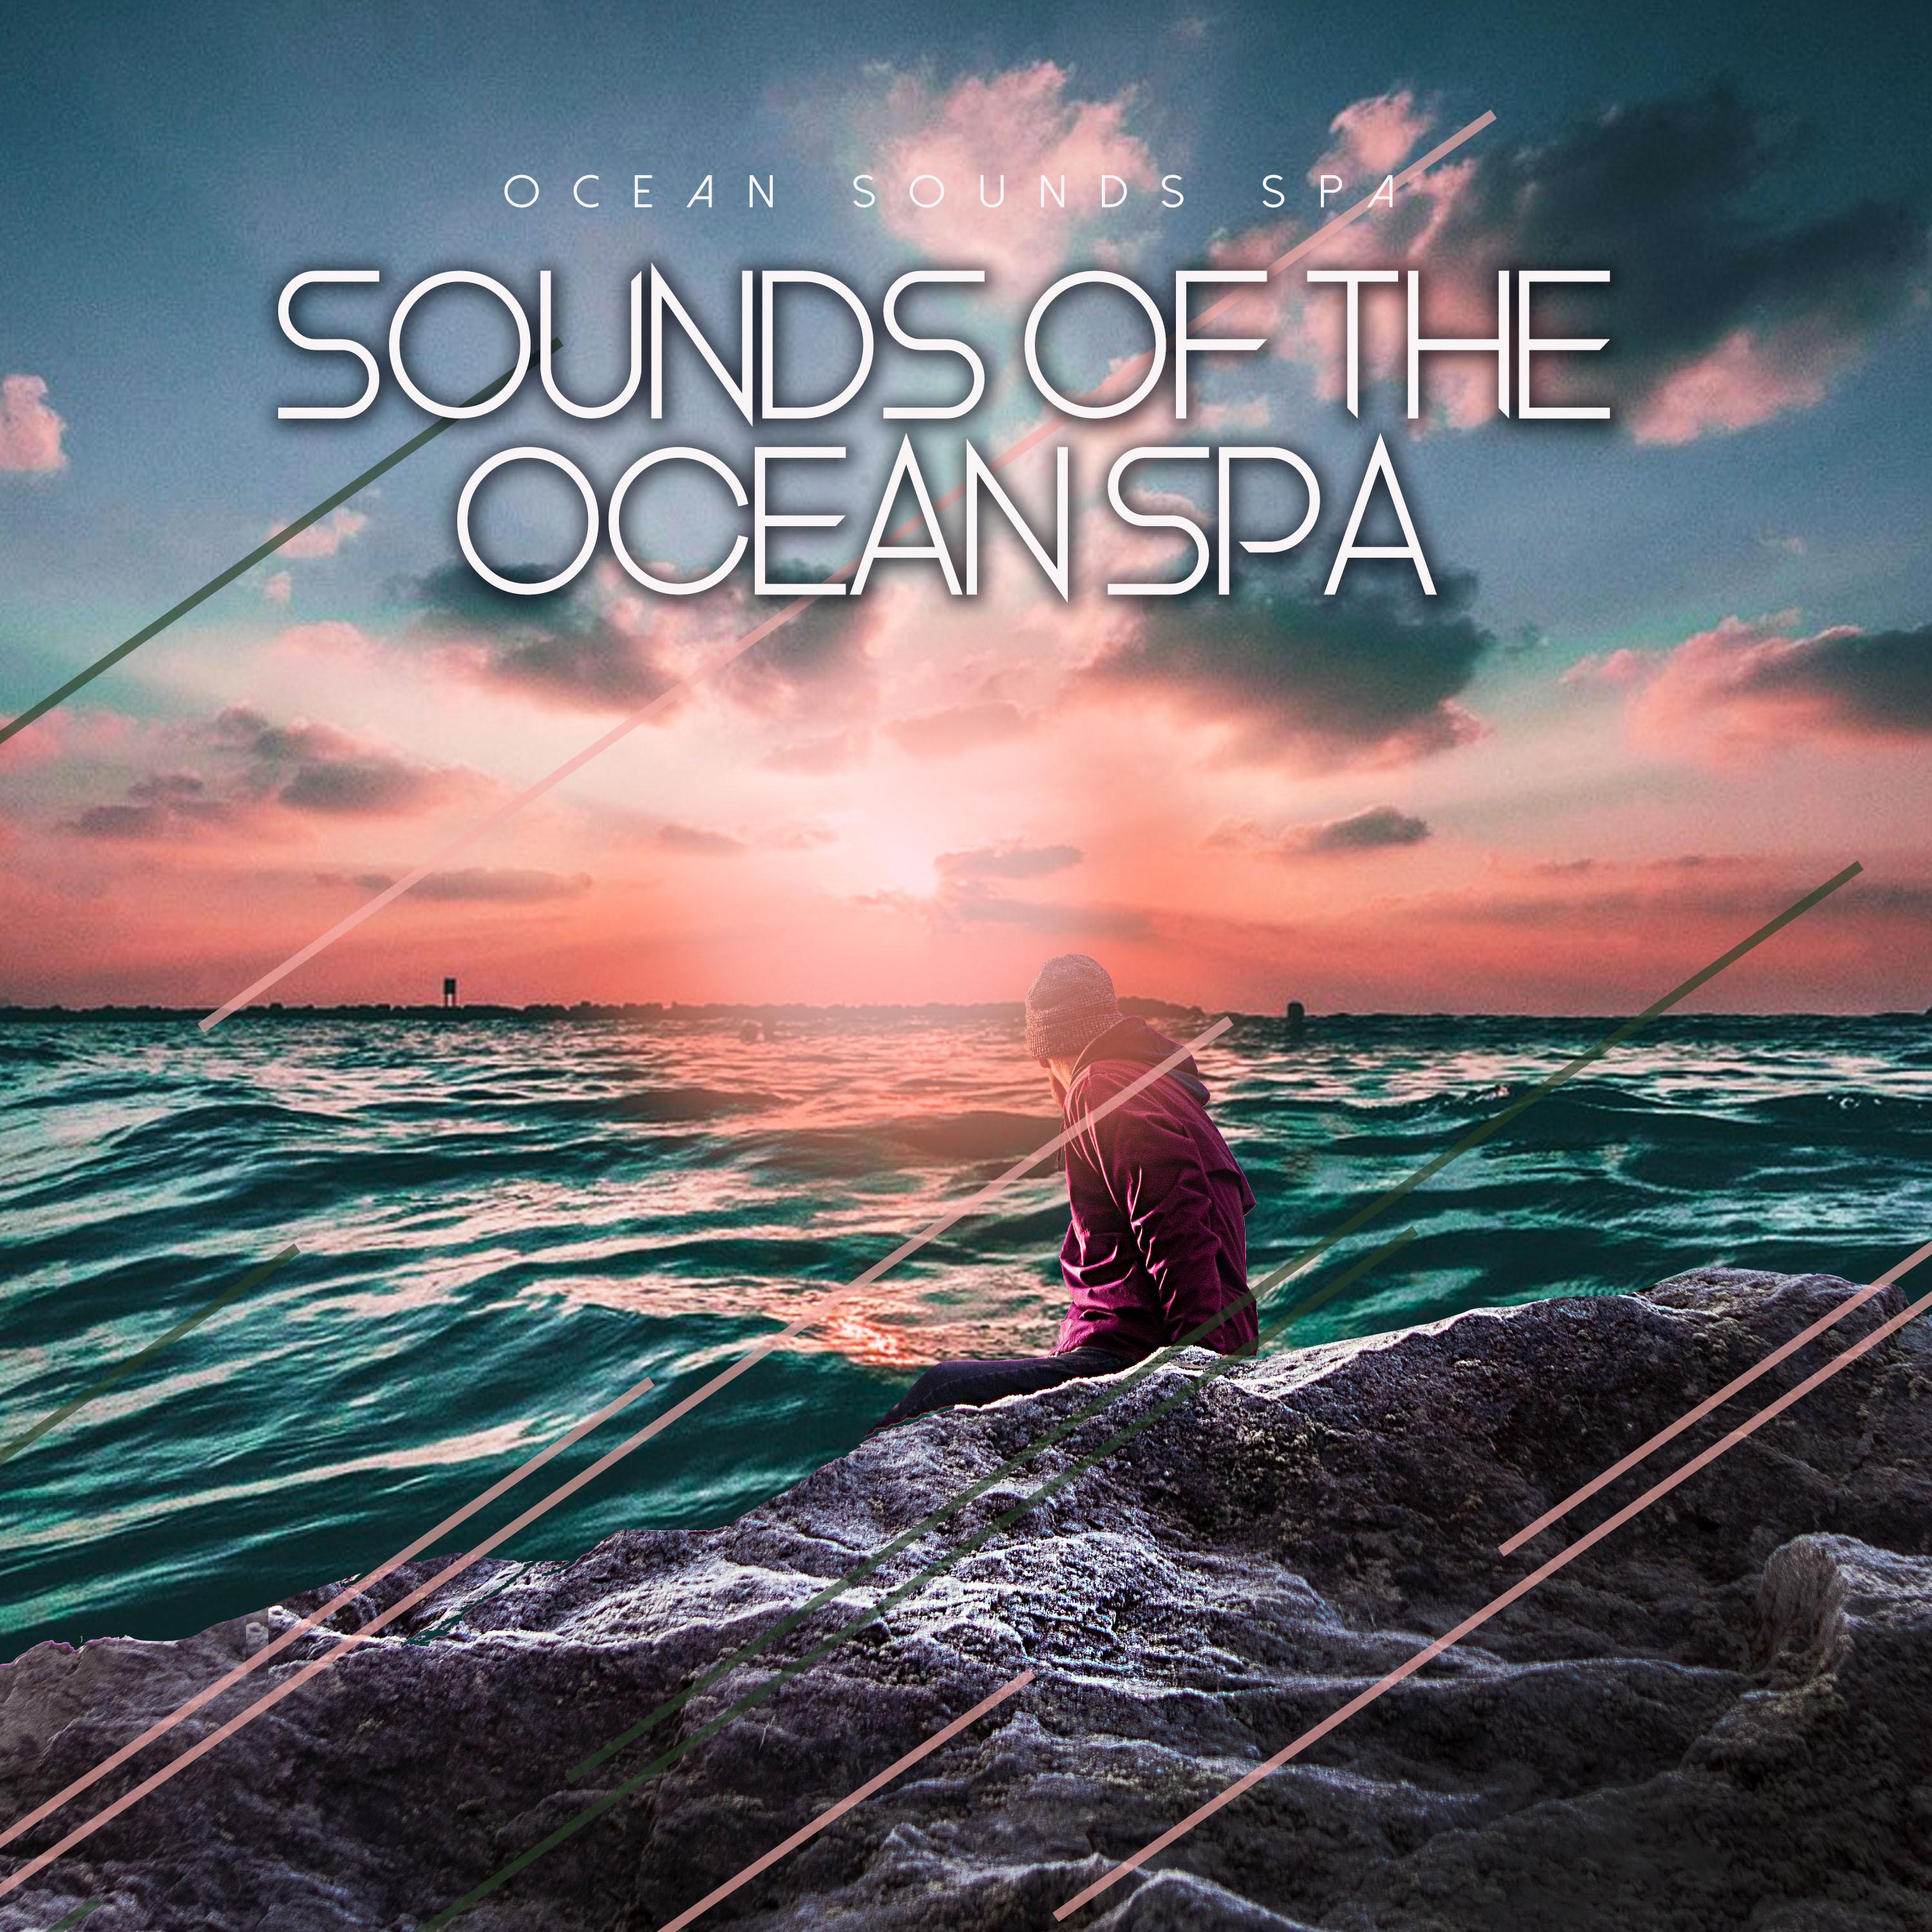 Sounds of the Ocean Spa